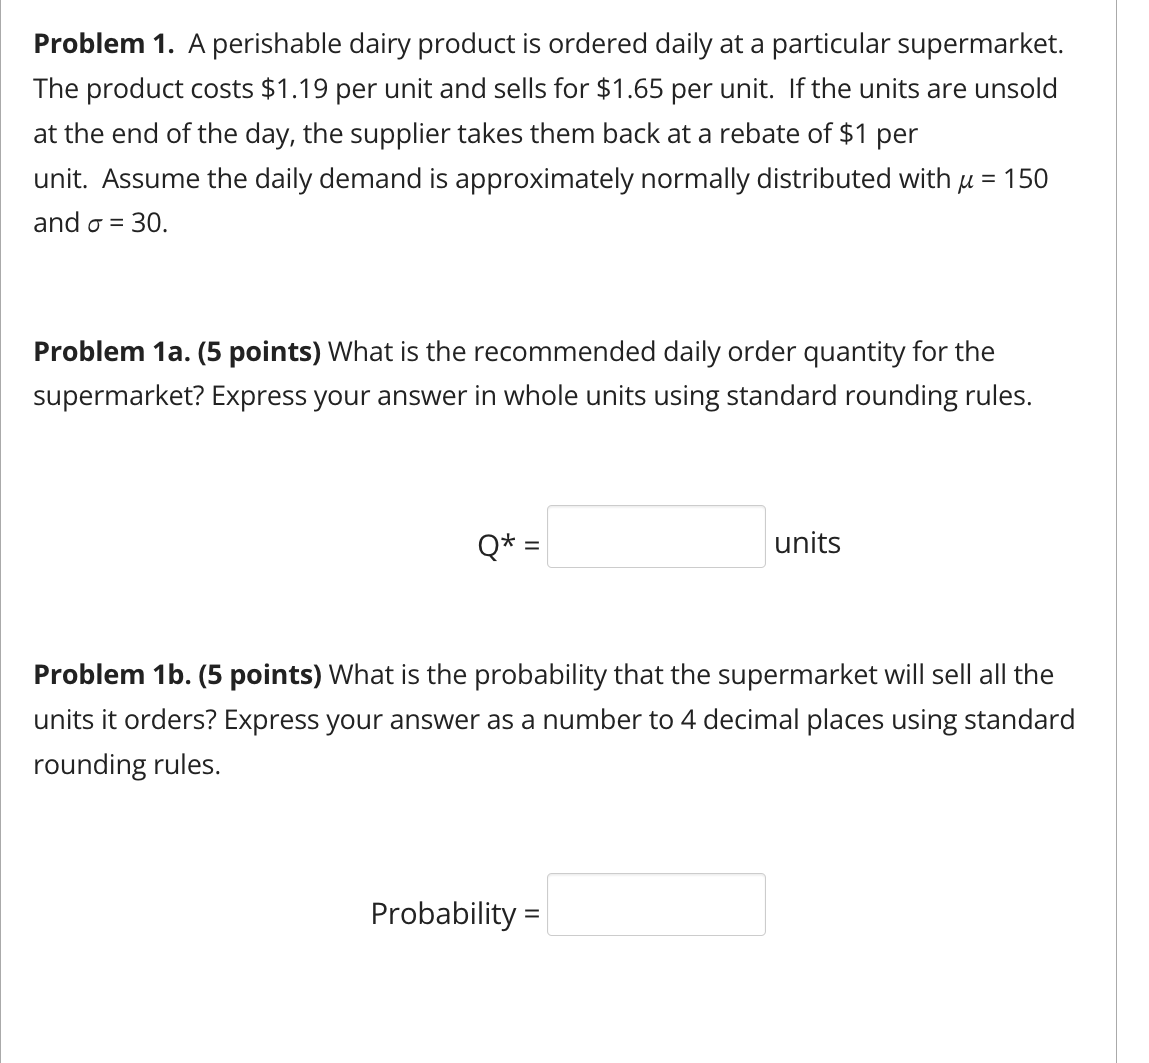 Problem 1. A perishable dairy product is ordered daily at a particular supermarket.
The product costs $1.19 per unit and sells for $1.65 per unit. If the units are unsold
at the end of the day, the supplier takes them back at a rebate of $1 per
unit. Assume the daily demand is approximately normally distributed with μ = 150
and σ = 30.
Problem 1a. (5 points) What is the recommended daily order quantity for the
supermarket? Express your answer in whole units using standard rounding rules.
Q* =
units
Problem 1b. (5 points) What is the probability that the supermarket will sell all the
units it orders? Express your answer as a number to 4 decimal places using standard
rounding rules.
Probability =